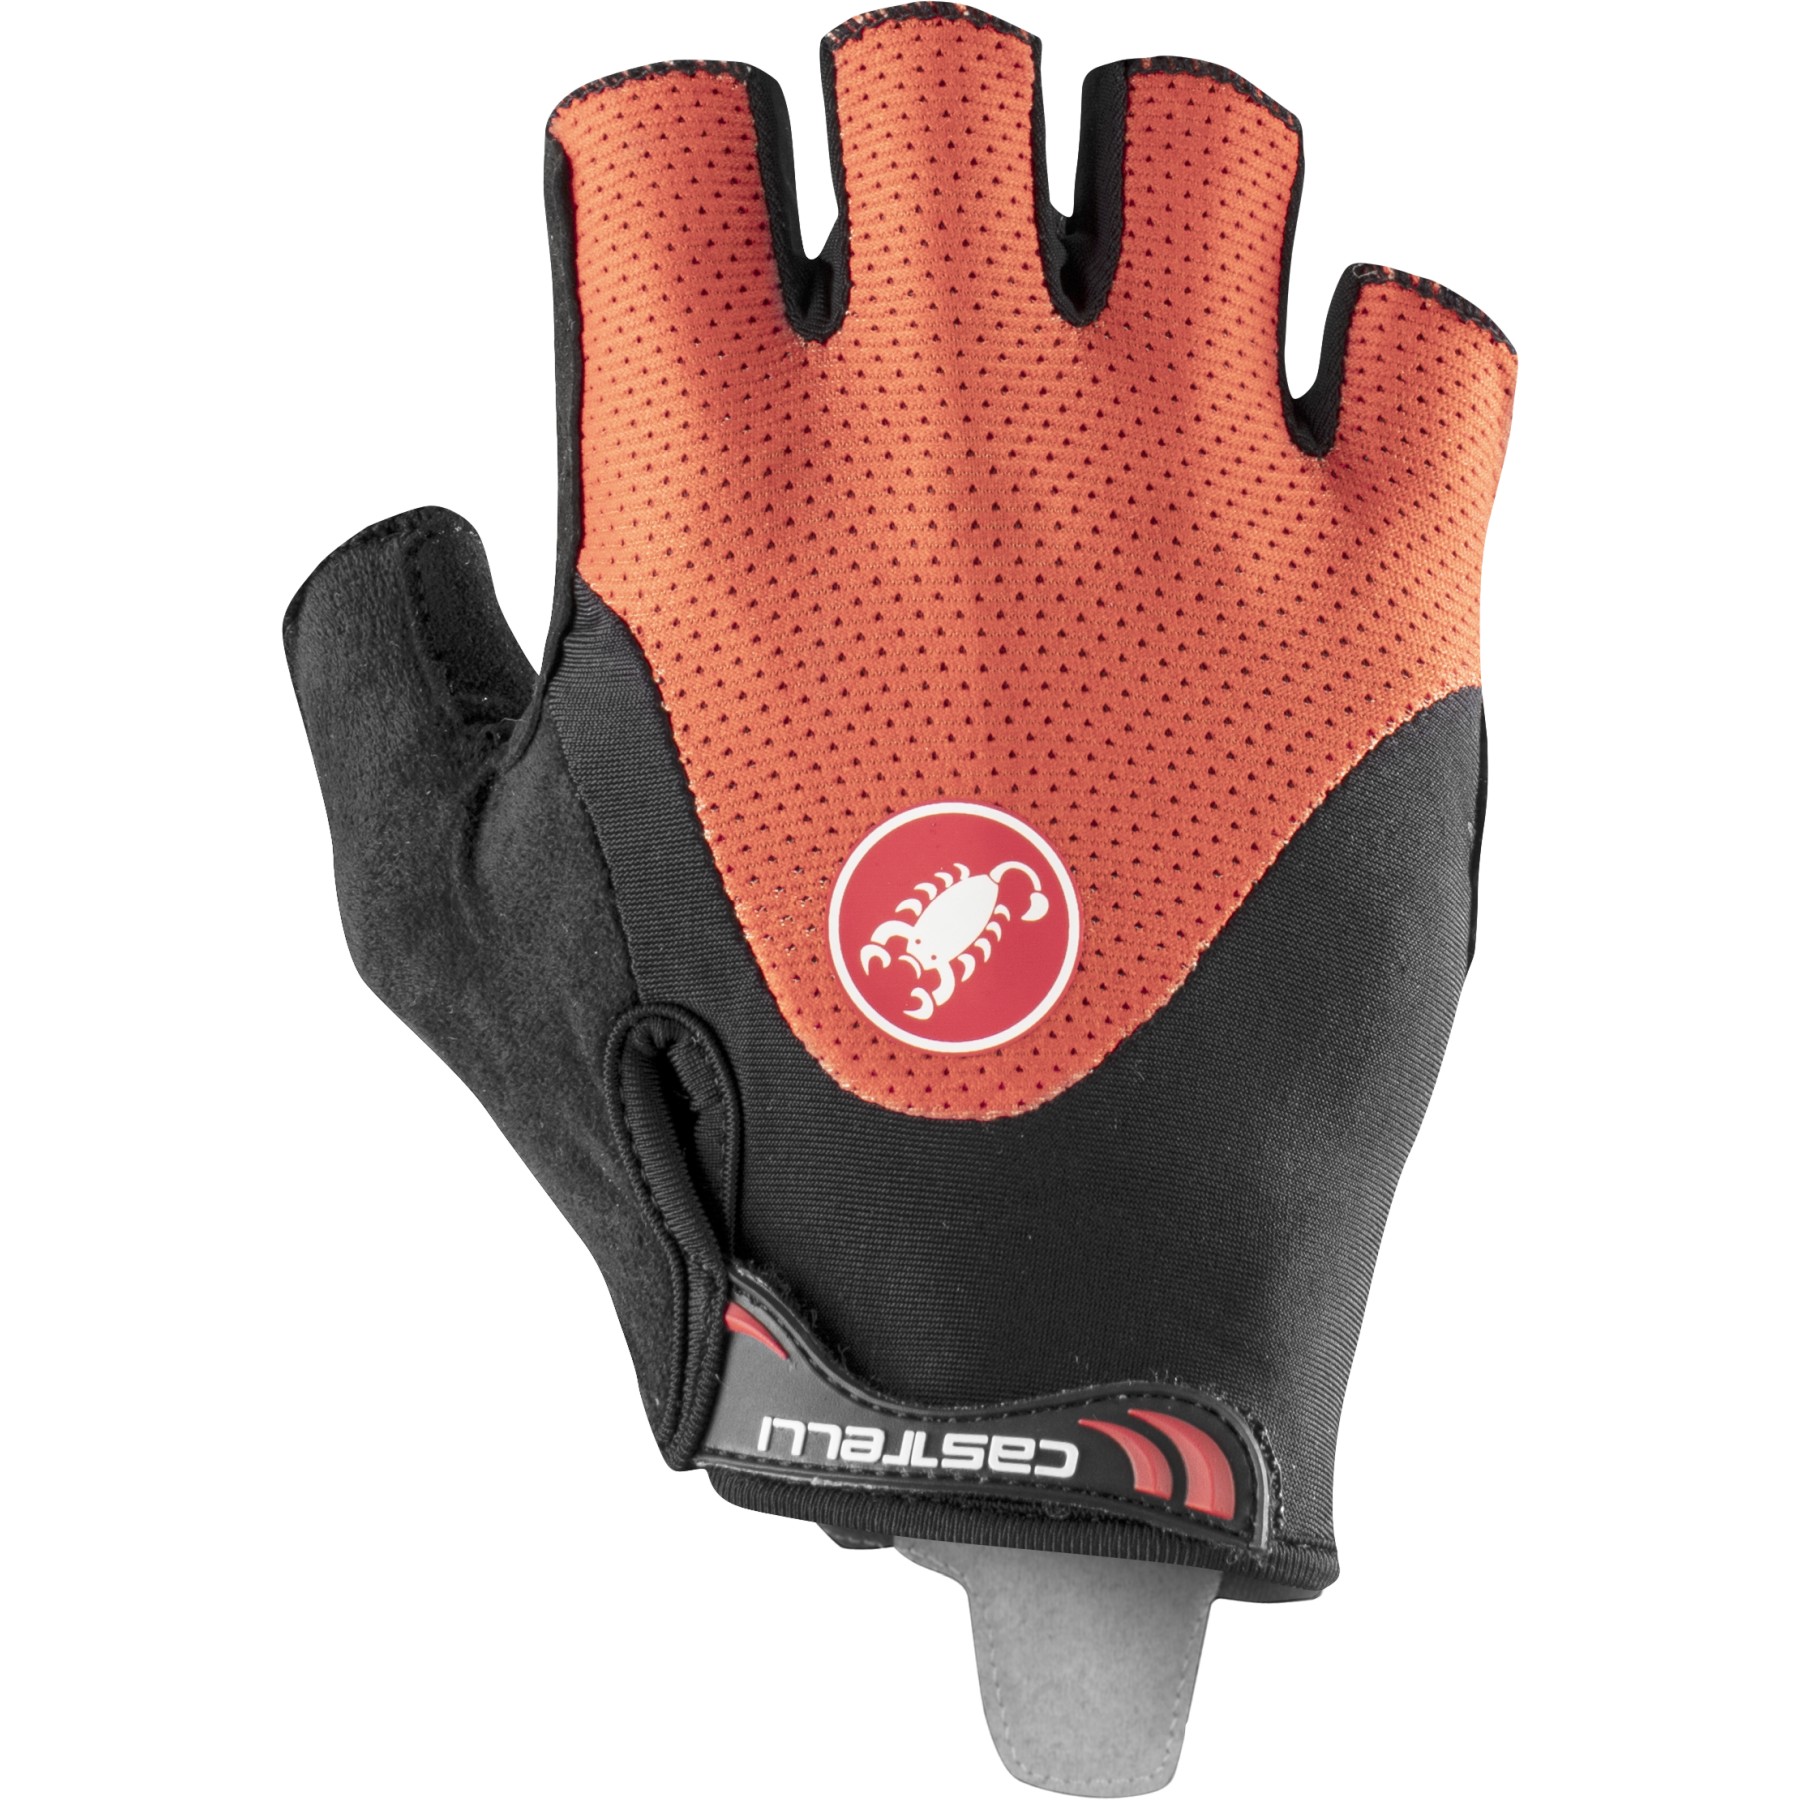 Picture of Castelli Arenberg Gel 2 Gloves - fiery red/black 656